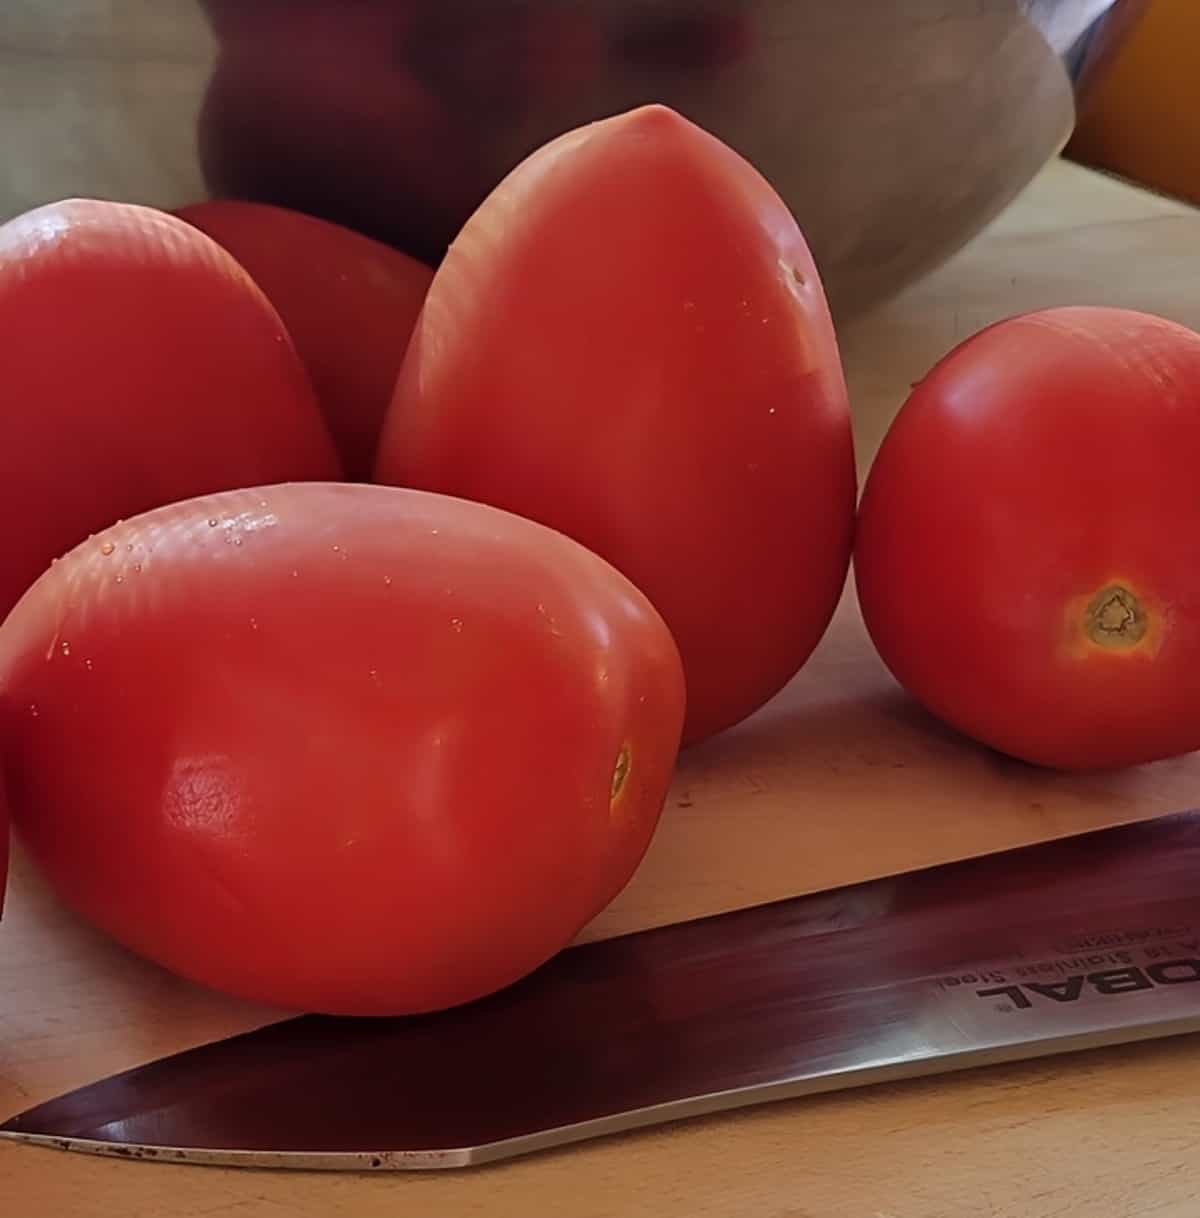 cutting board, knife, and whole tomatoes